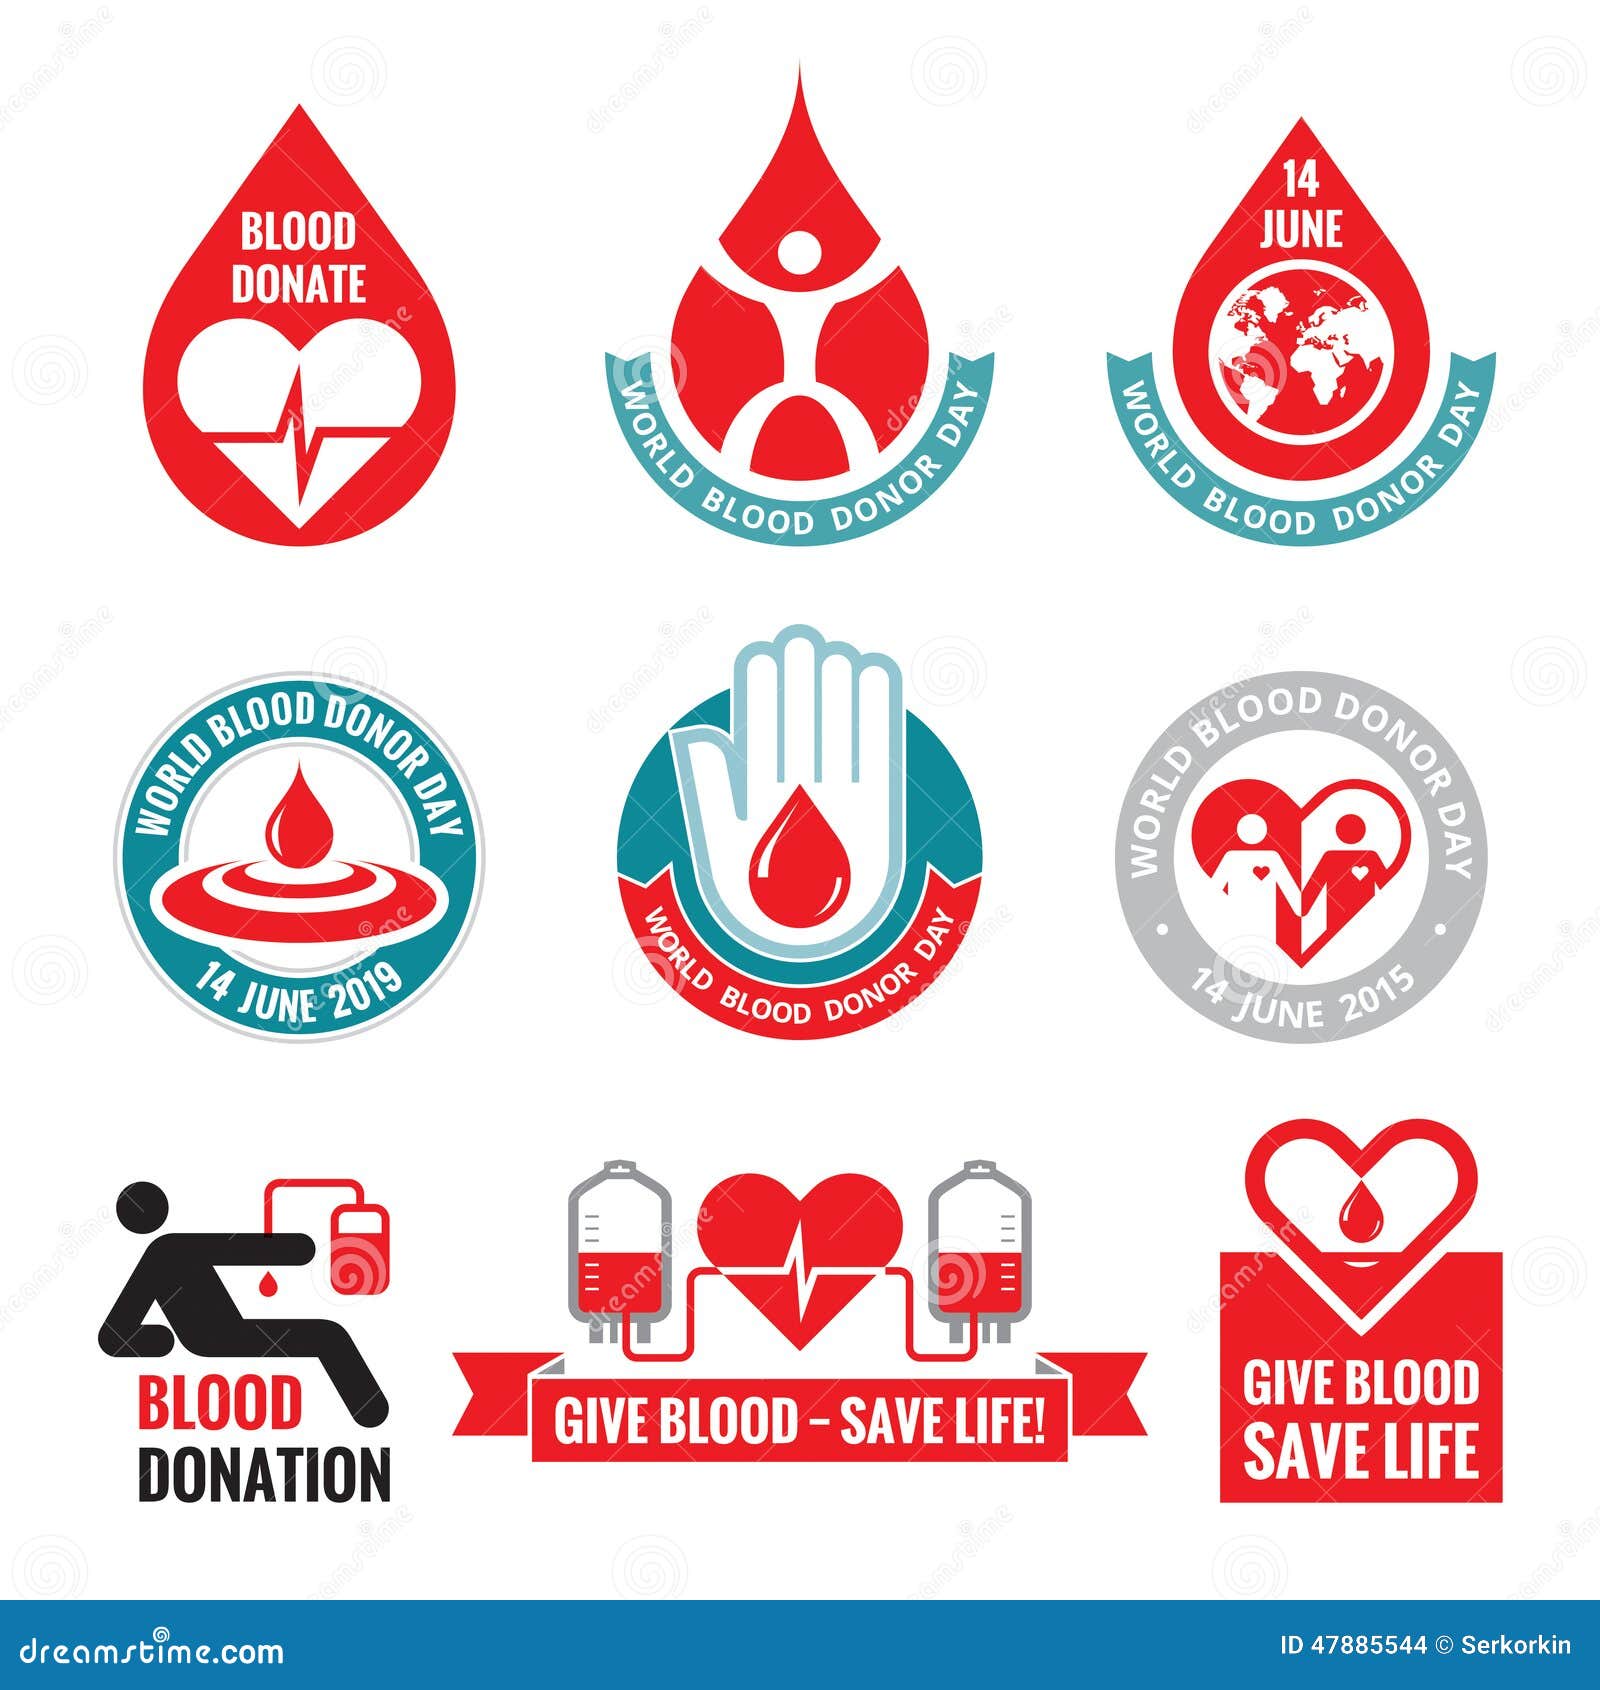 National Federation of Voluntary Blood Donors Organisation, INDIA